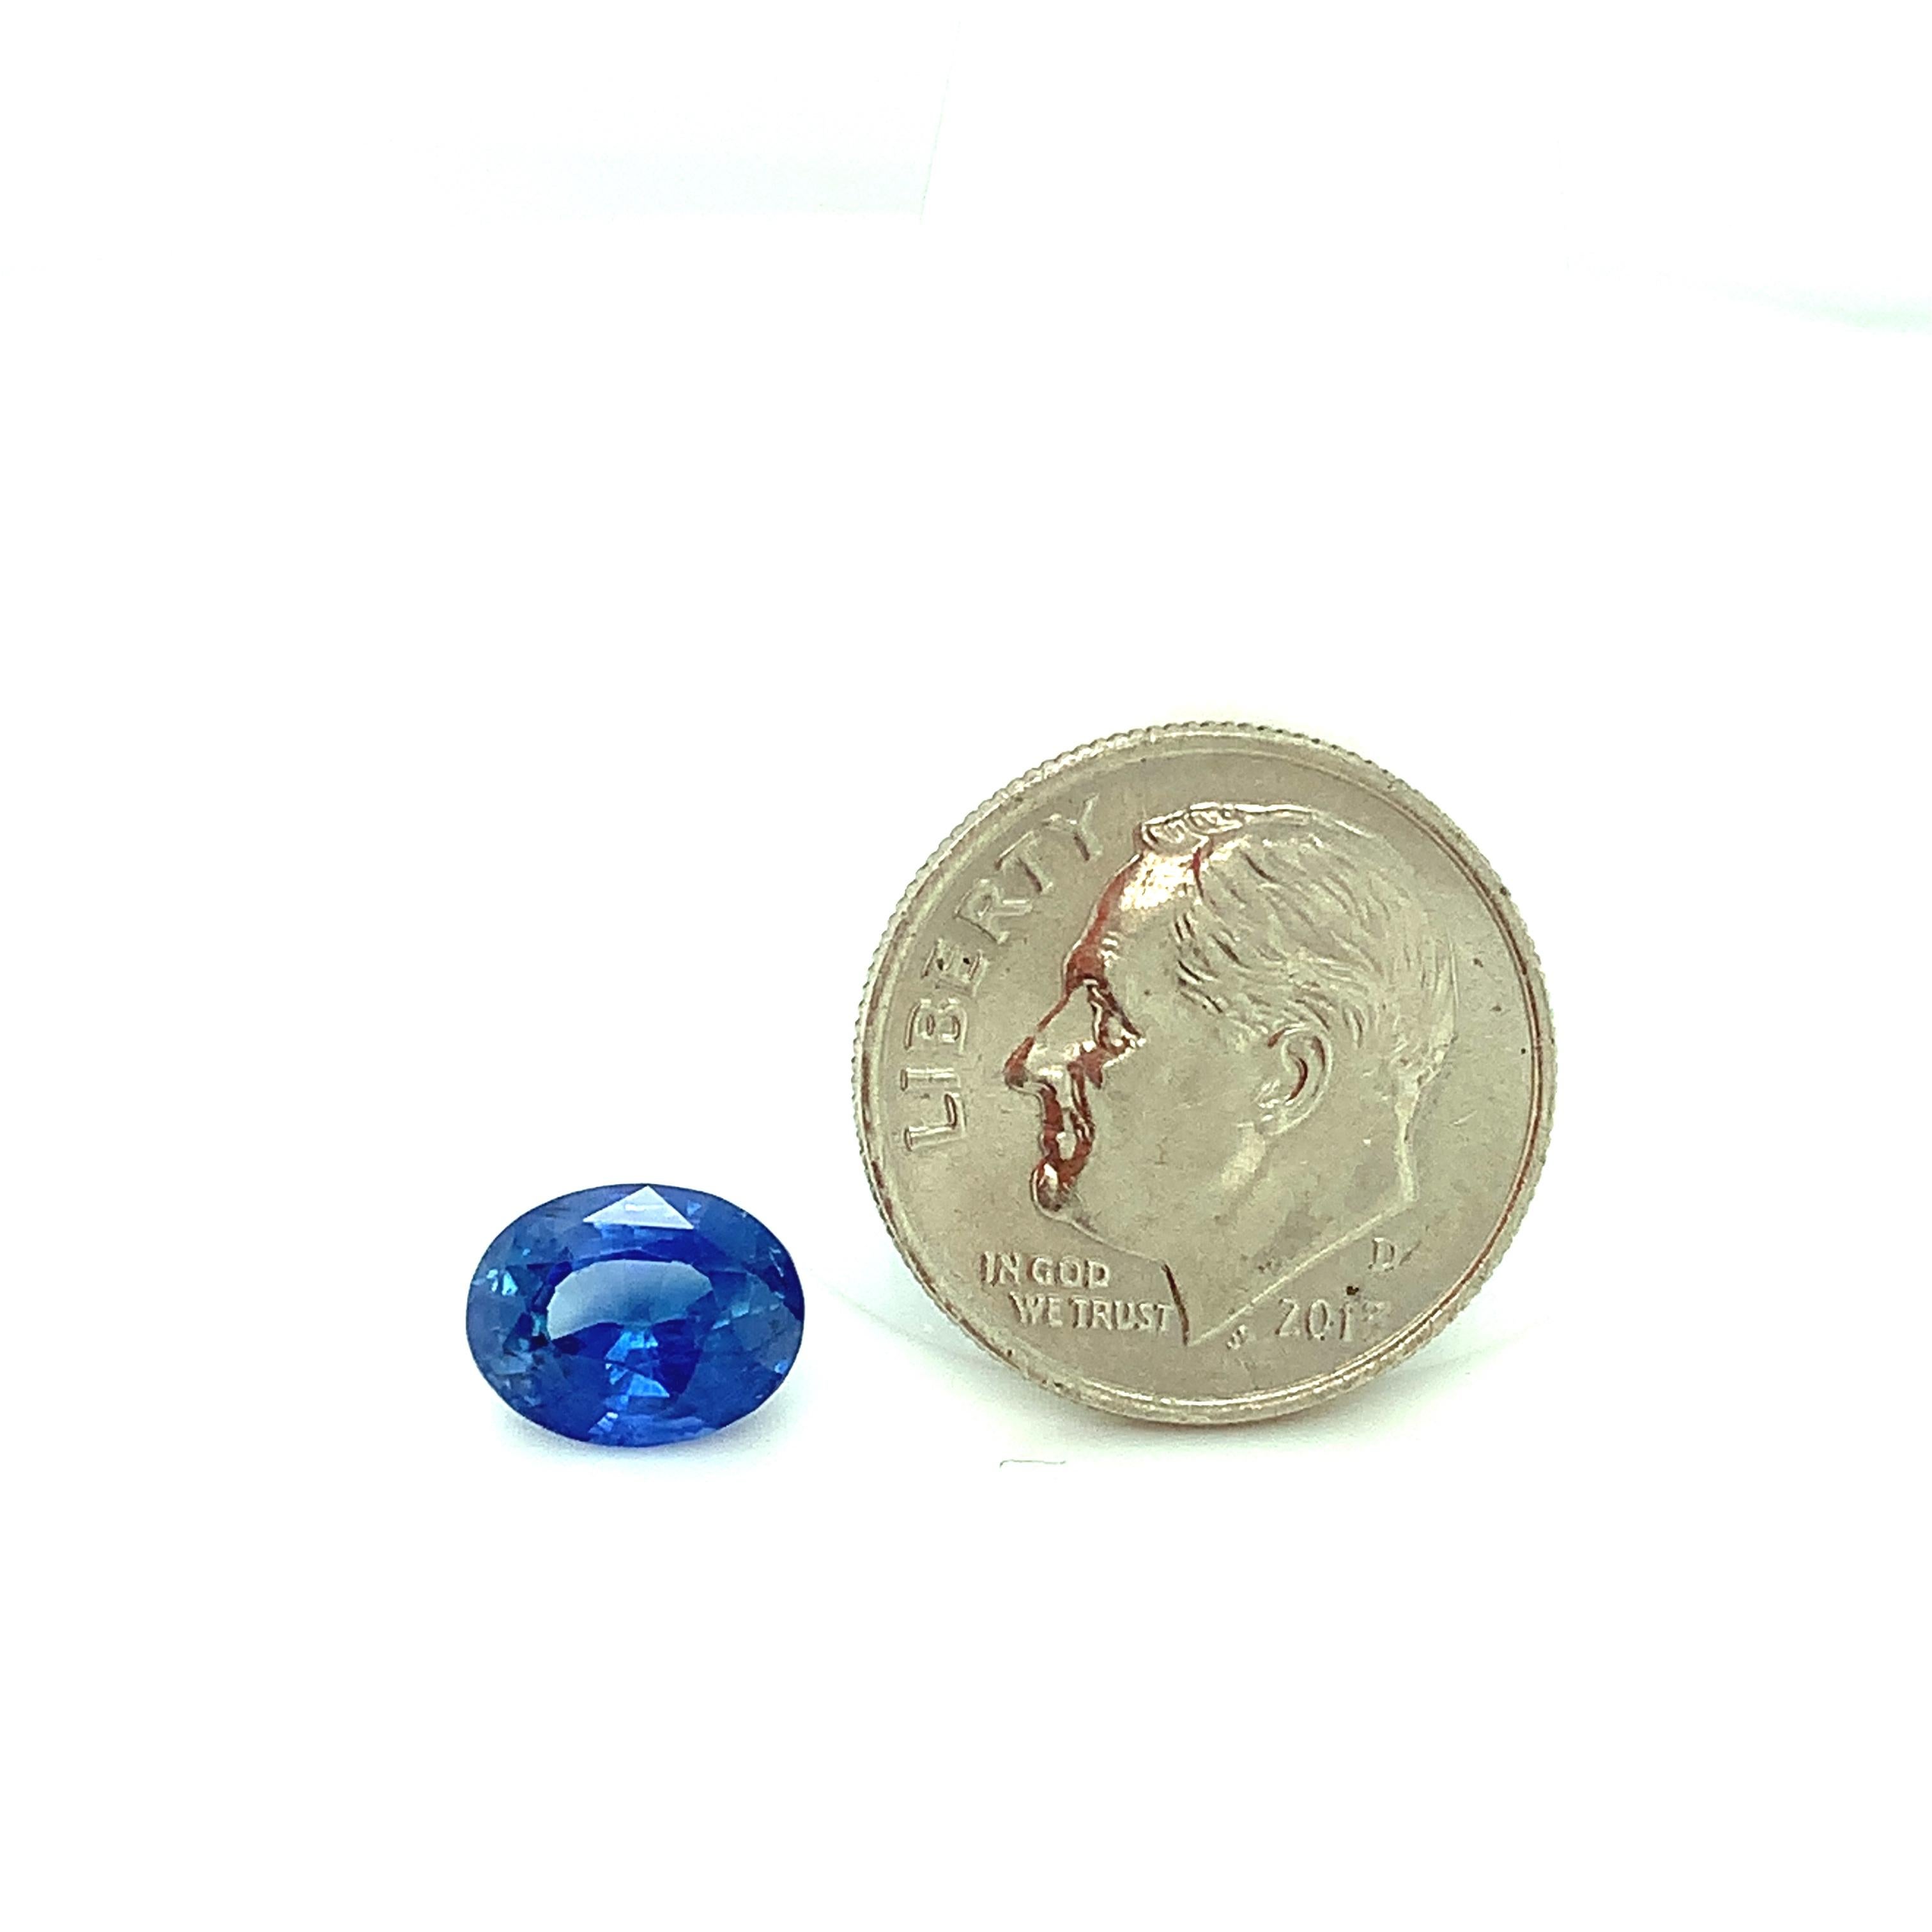 2.19 Carat Cornflower Blue Sapphire Oval, Unset Loose Gemstone, GIA Certified For Sale 1